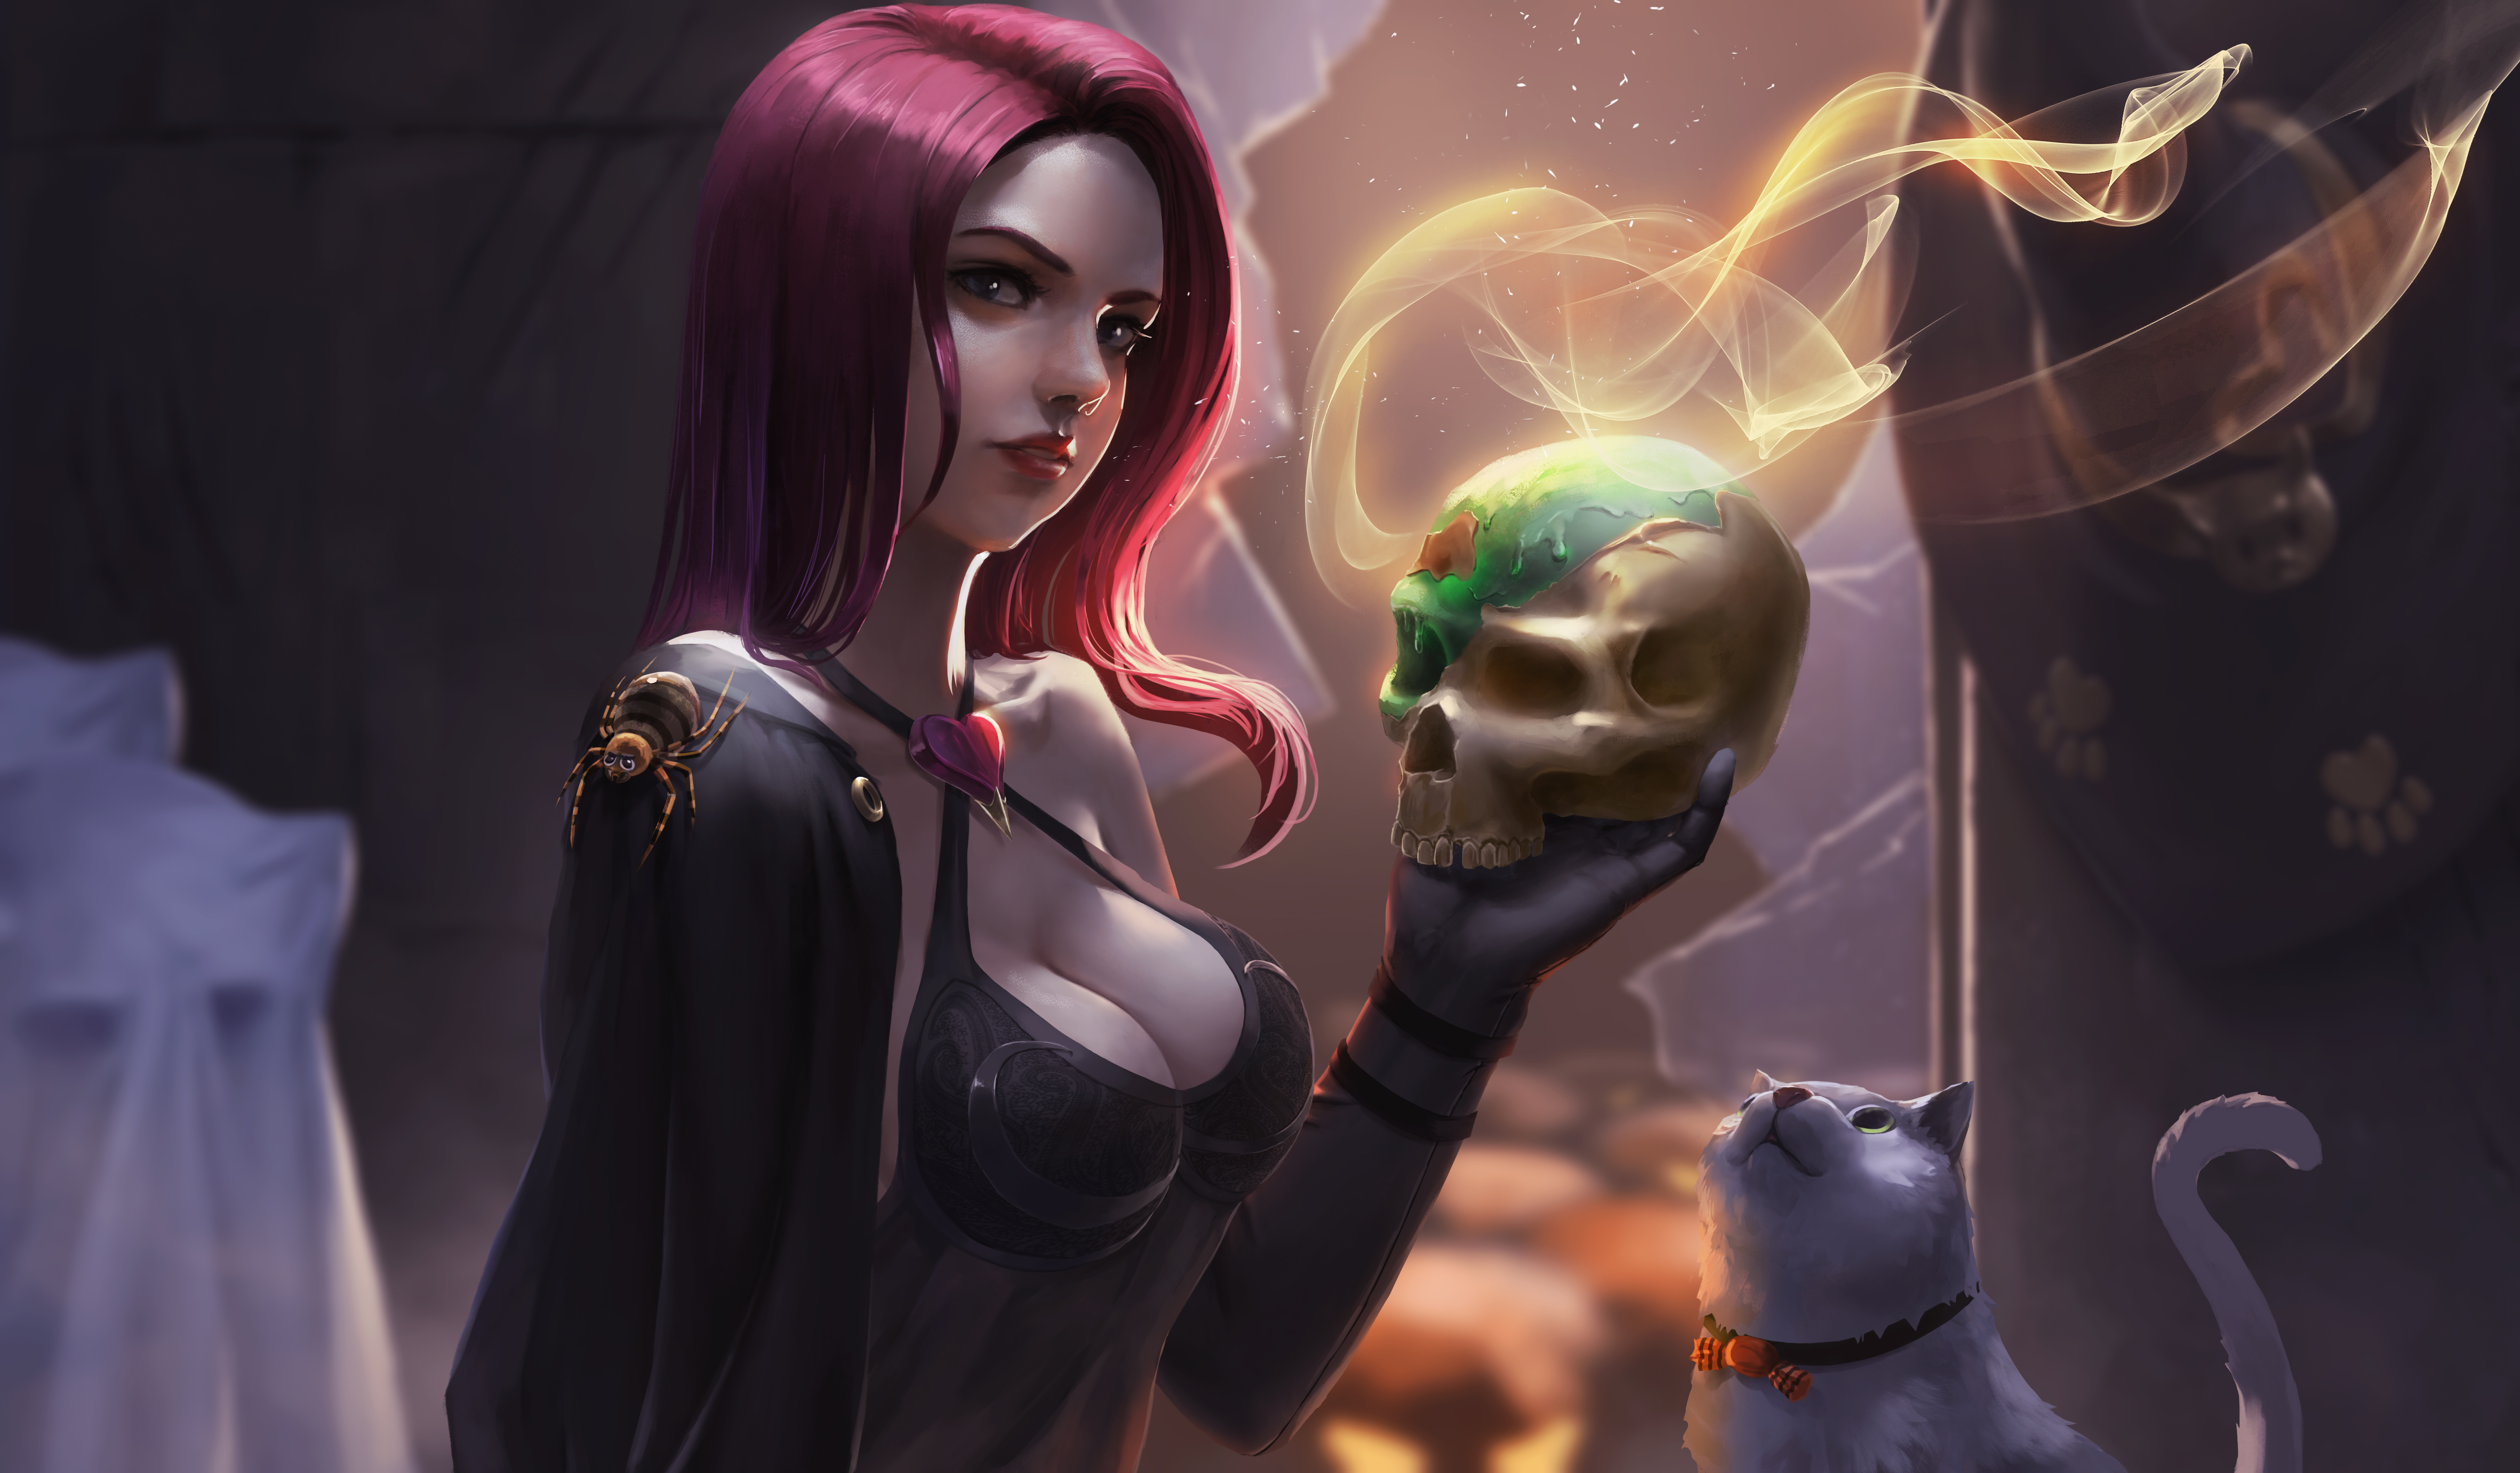 General 6000x3508 women fantasy girl witch witch hat fantasy art redhead looking at viewer portrait magic skull dress black dress cleavage cats spider animals Halloween original characters artwork drawing illustration digital art Allen Hsieh